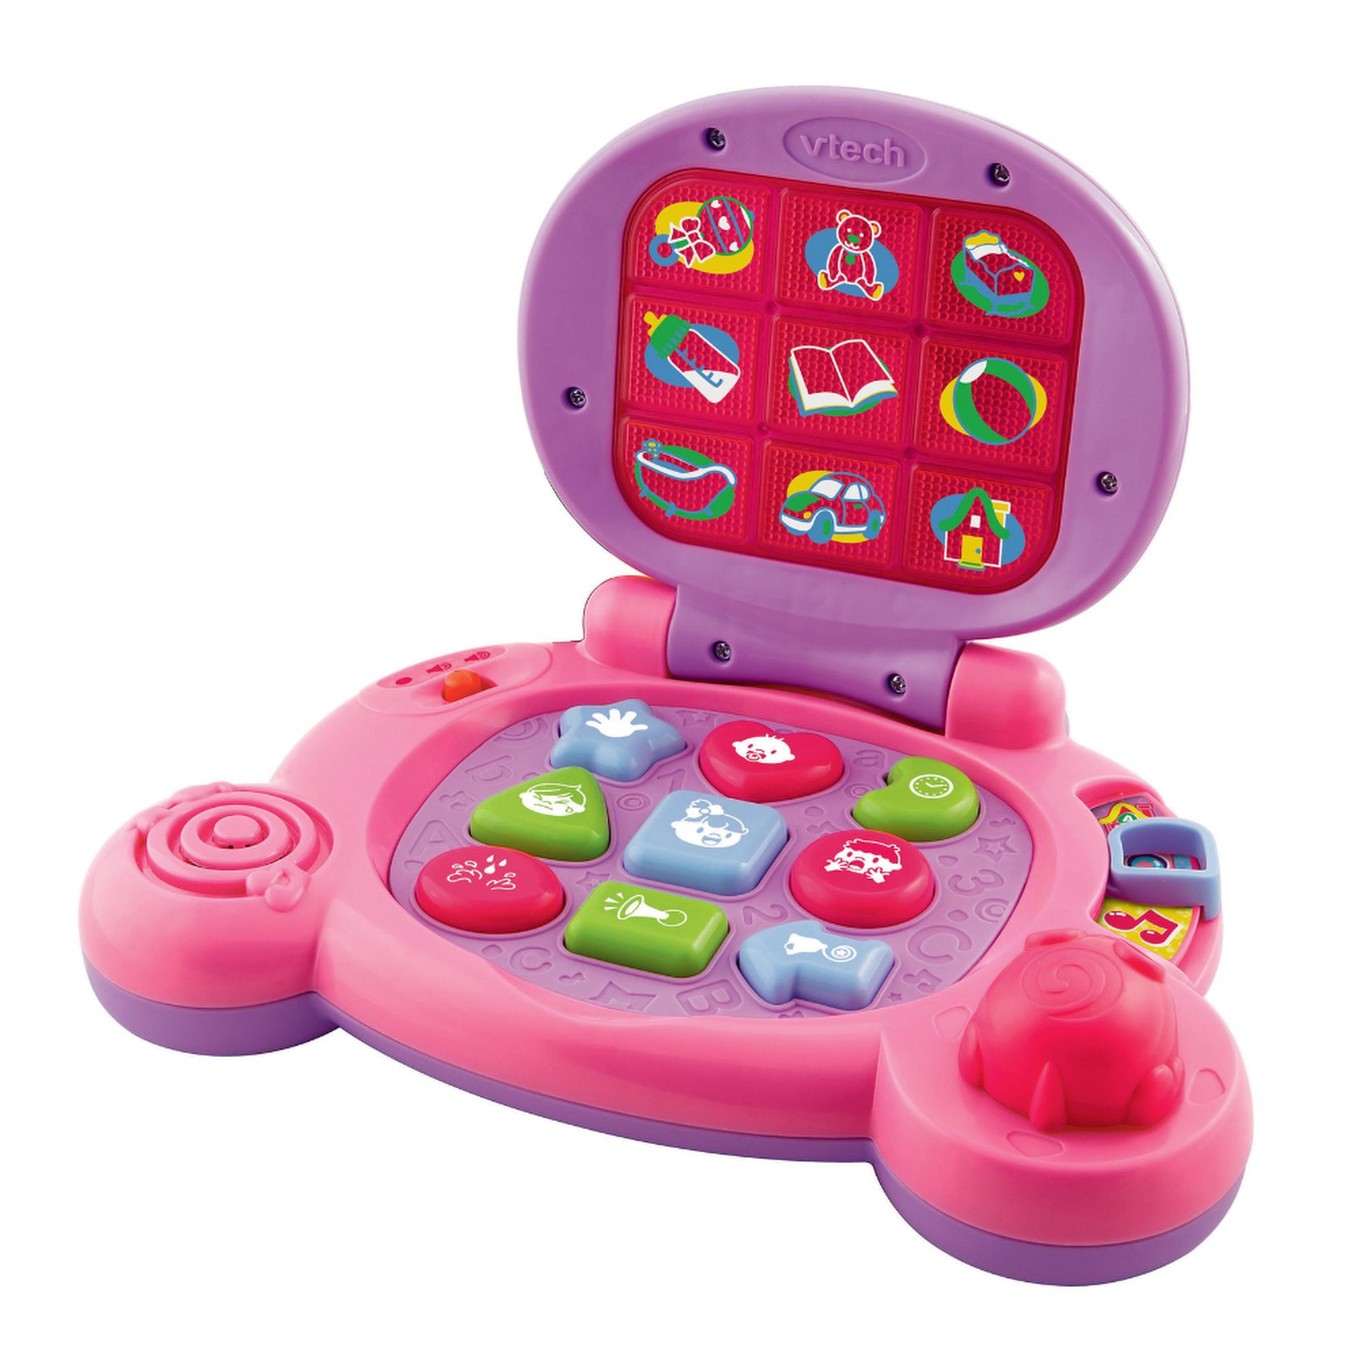 VTech Baby's Learning Laptop Computer Pink My First PC Toddler Educational  Toy